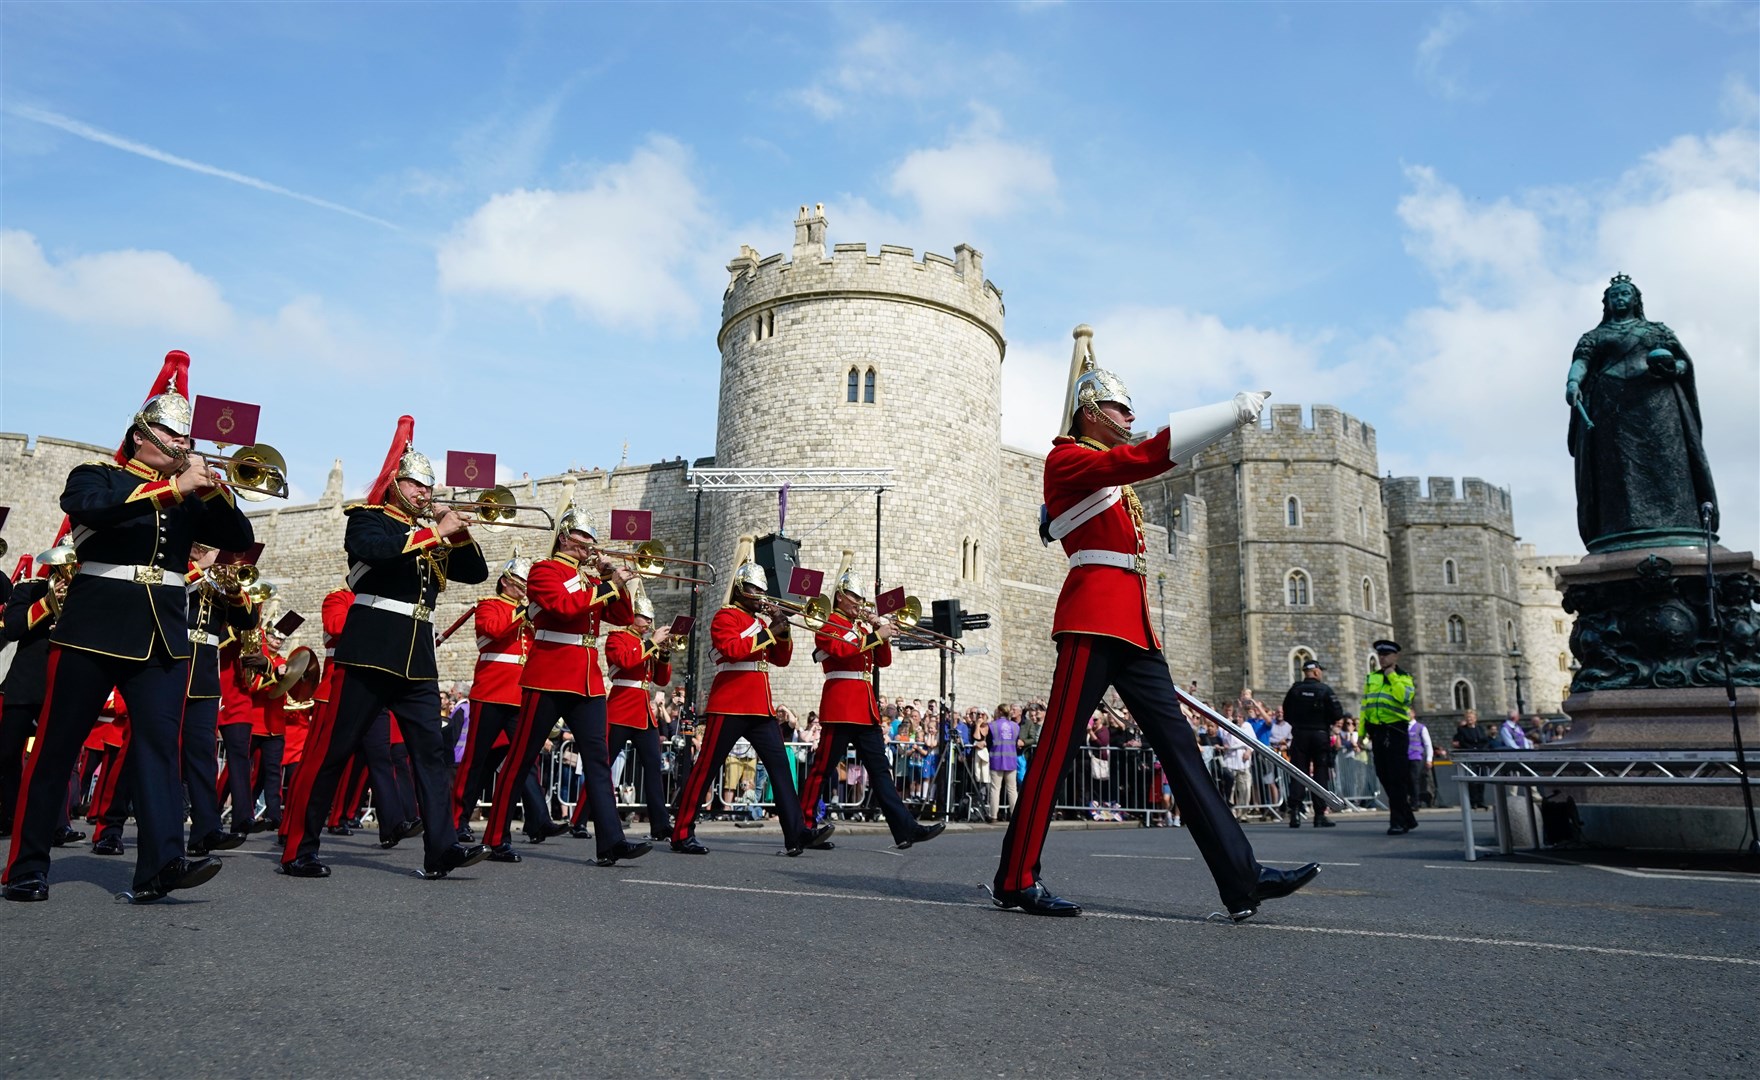 The band of The Household Cavalry march past a statue of Queen Victoria following an accession proclamation ceremony at Windsor Castle (Andrew Matthews/PA)